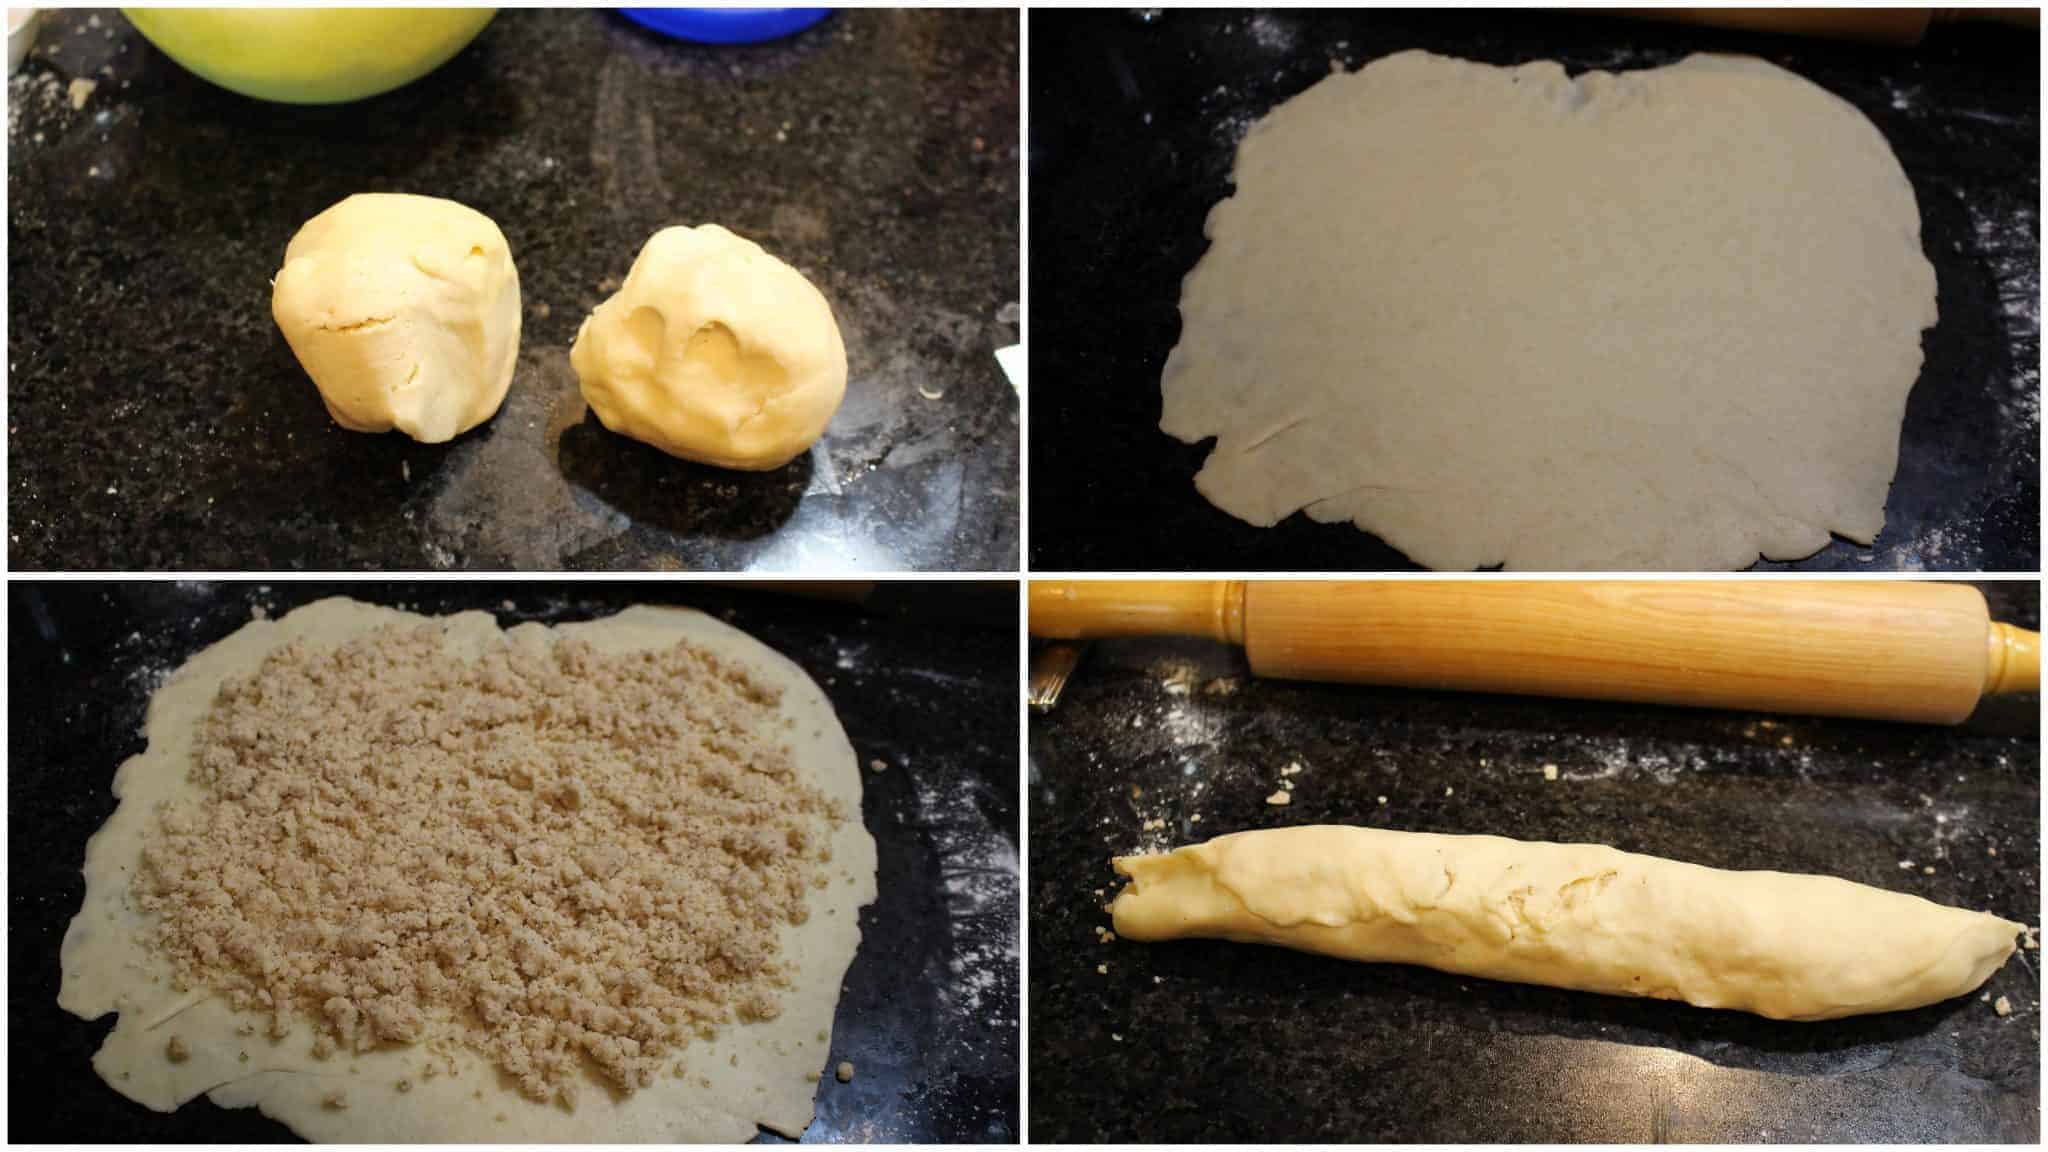 Shaping and baking the nazook